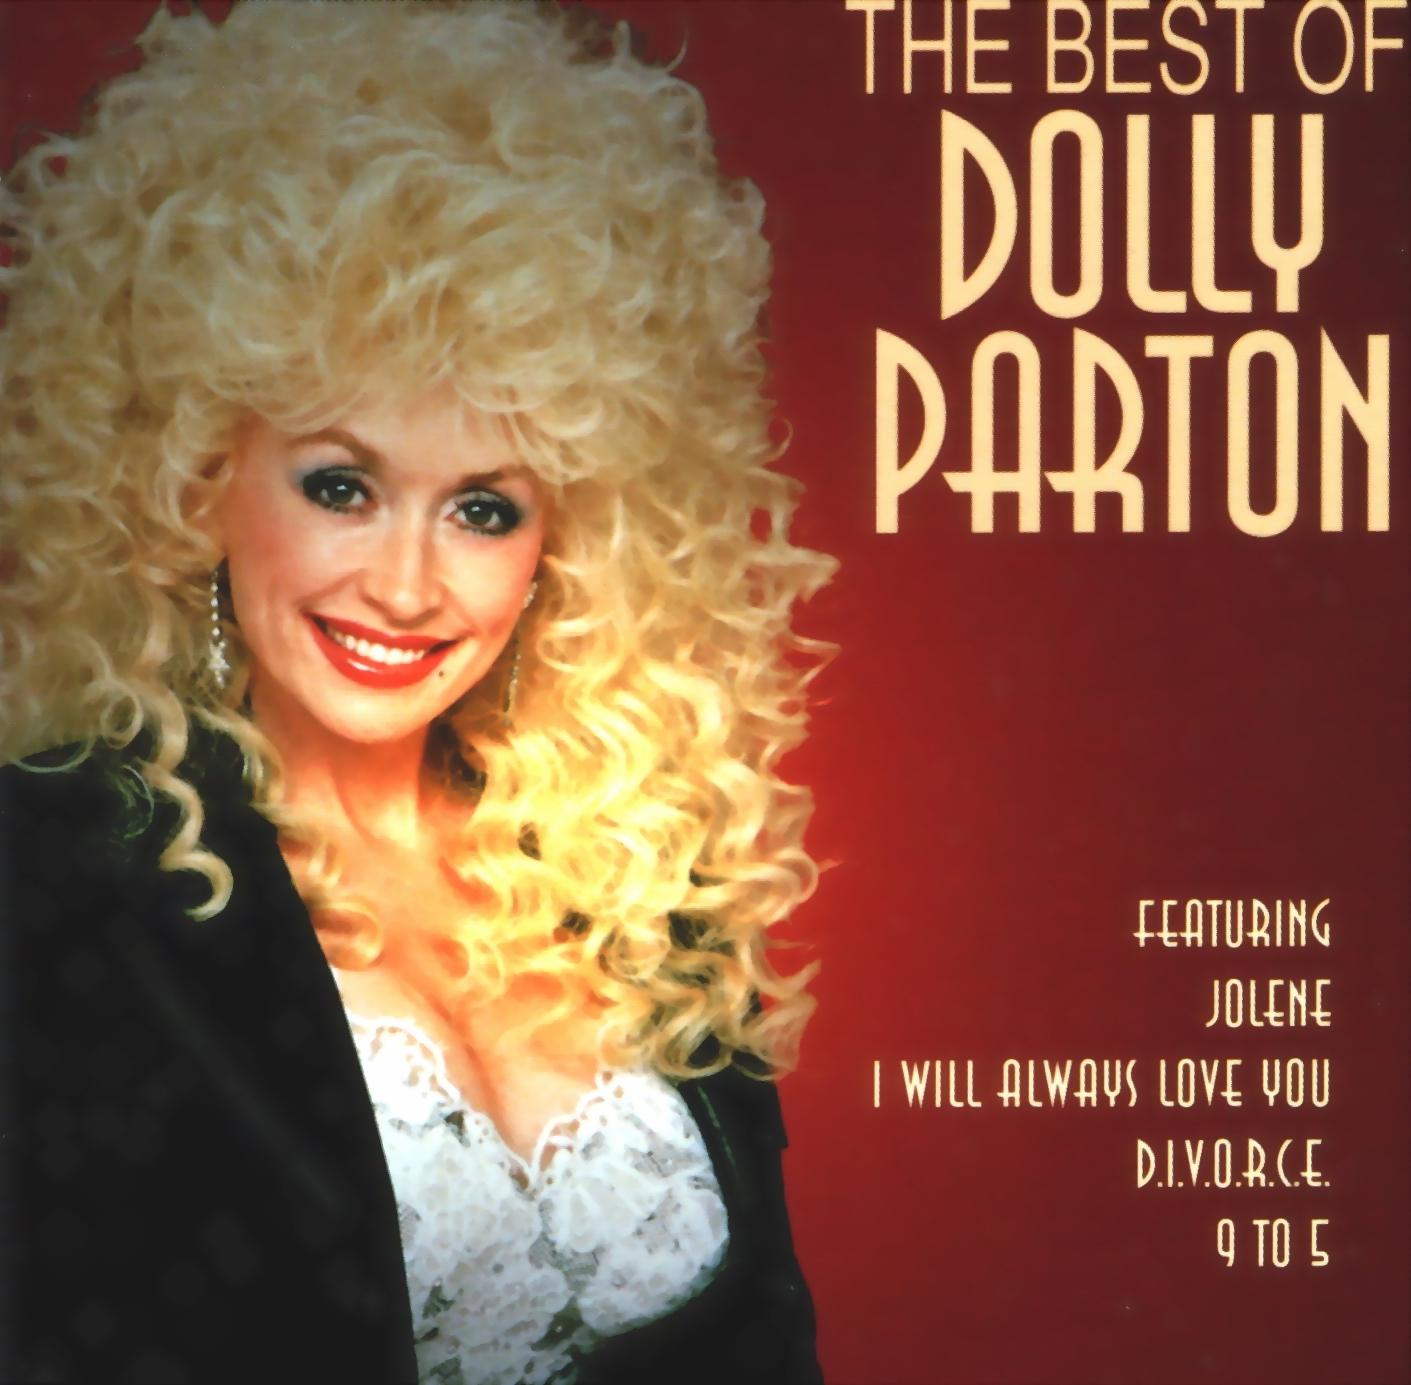 COVERS.BOX.SK ::: dolly parton - the best of dolly parton - high quality DVD / Blueray ...1411 x 1385